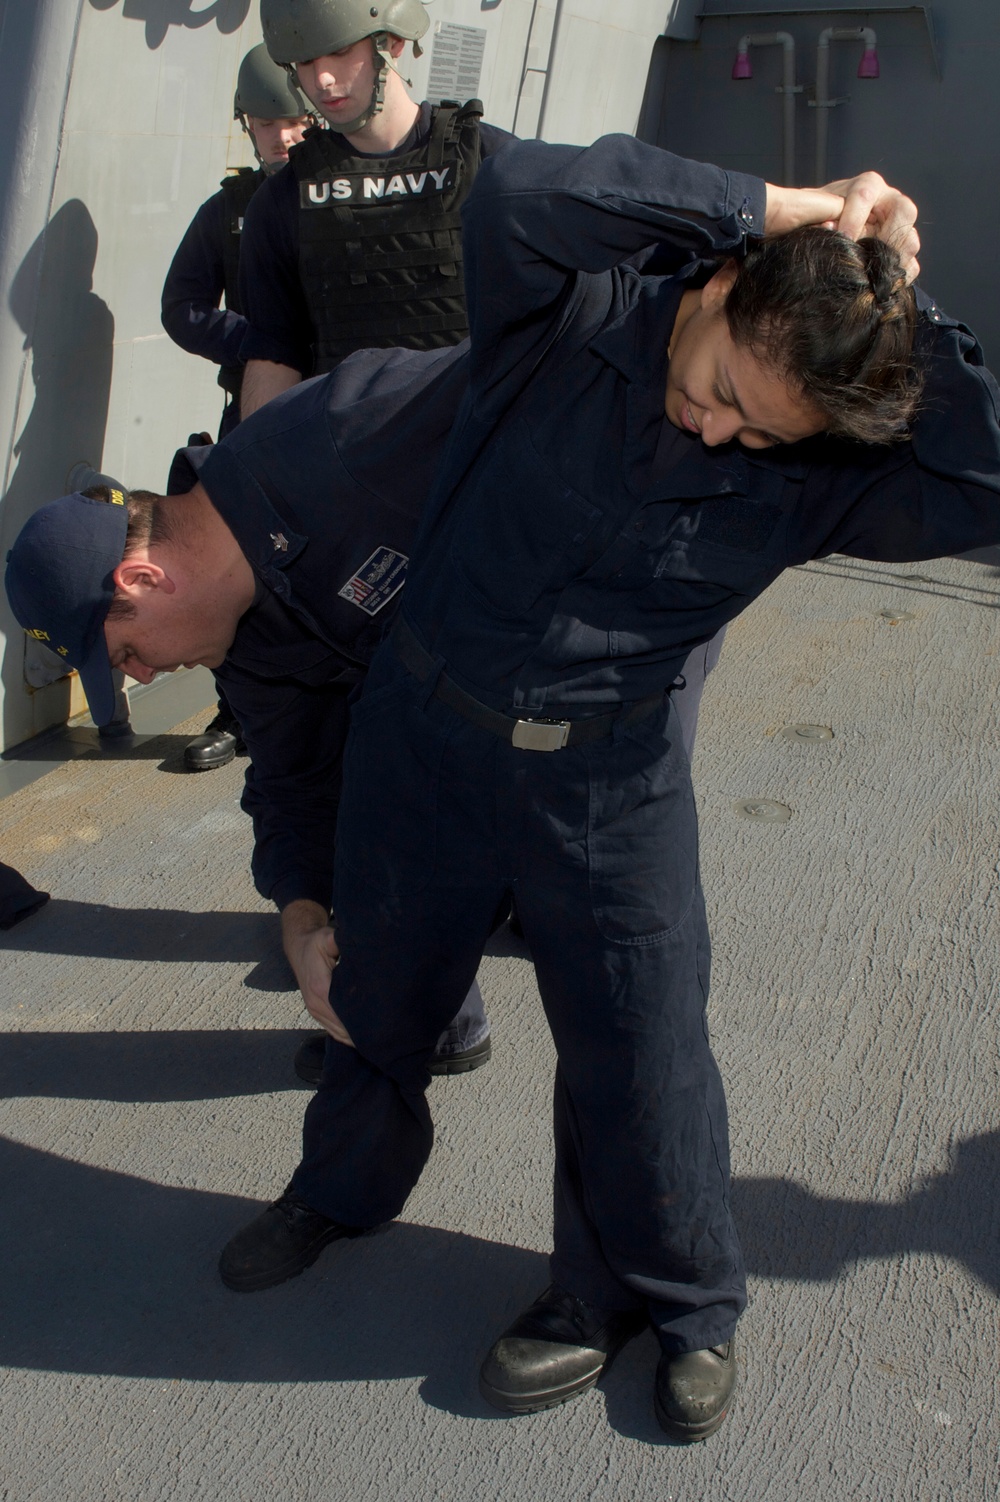 Security reaction force training aboard USS Carney